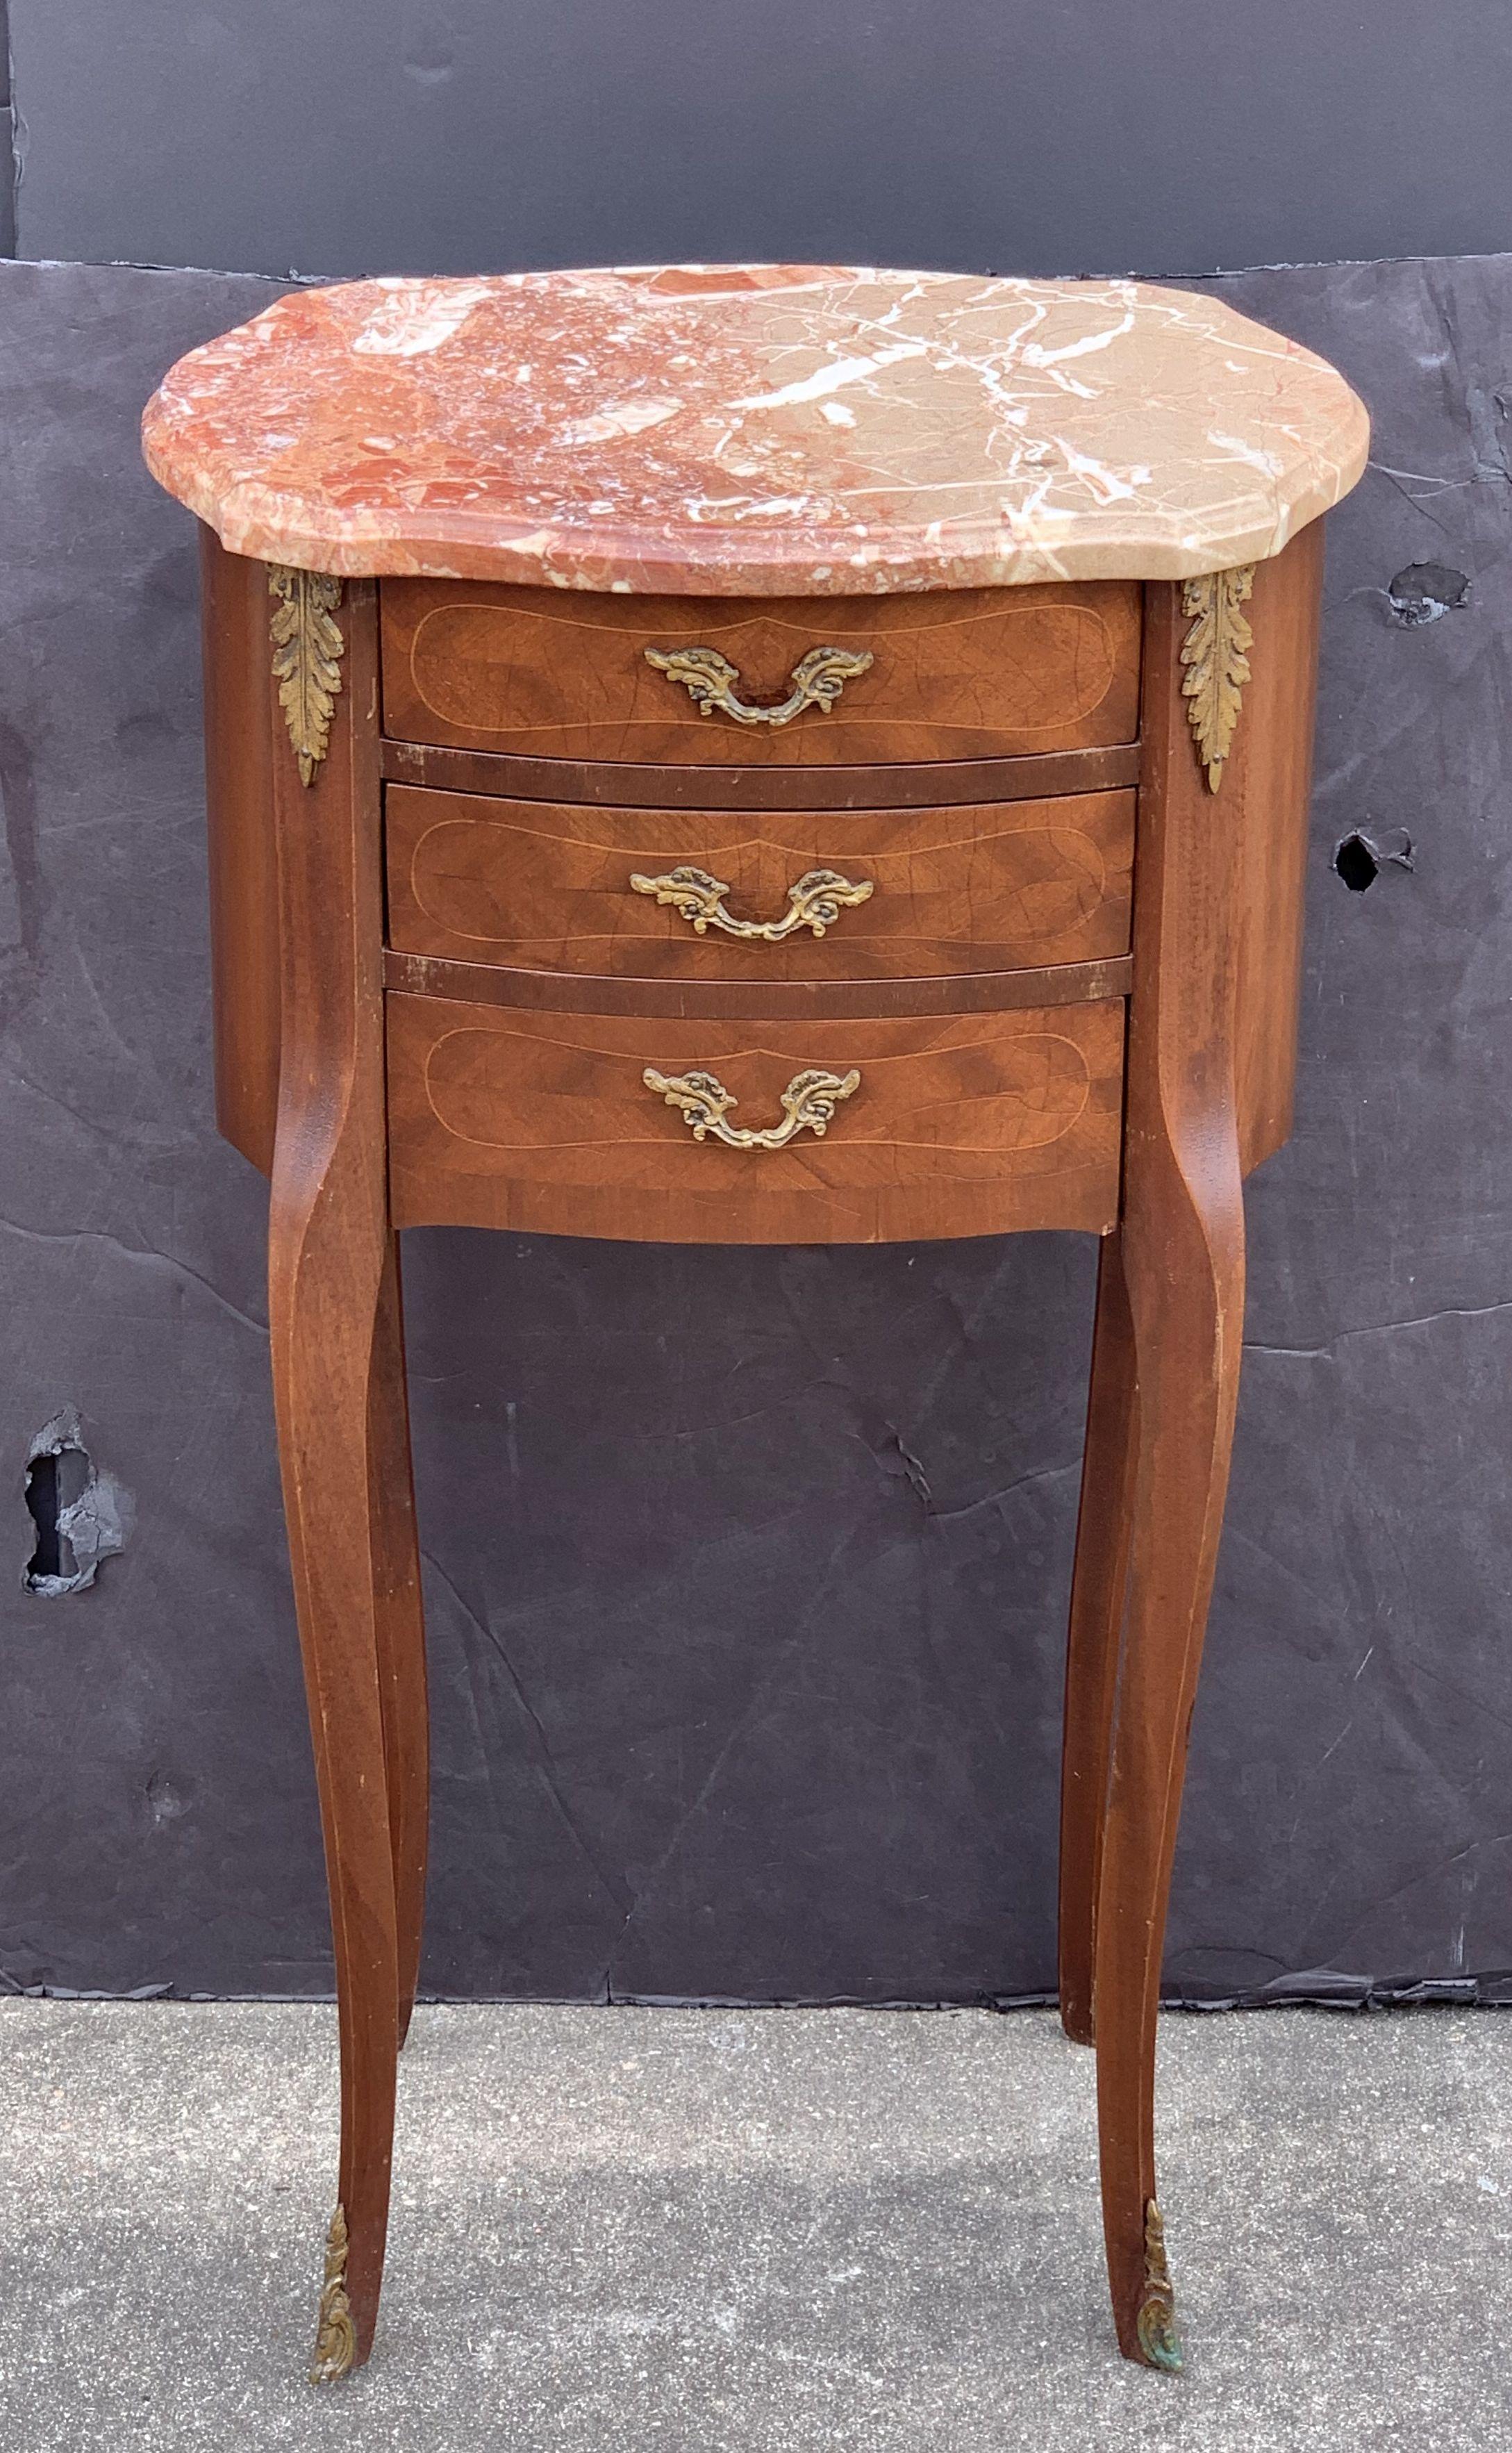 A fine pair of French bedside end tables or nightstands (or night stands) - each stand or side table featuring a figured marble-top with serpentine edge over a frieze with three inlaid drawers with decorative brass pulls, ormolu accents, and set